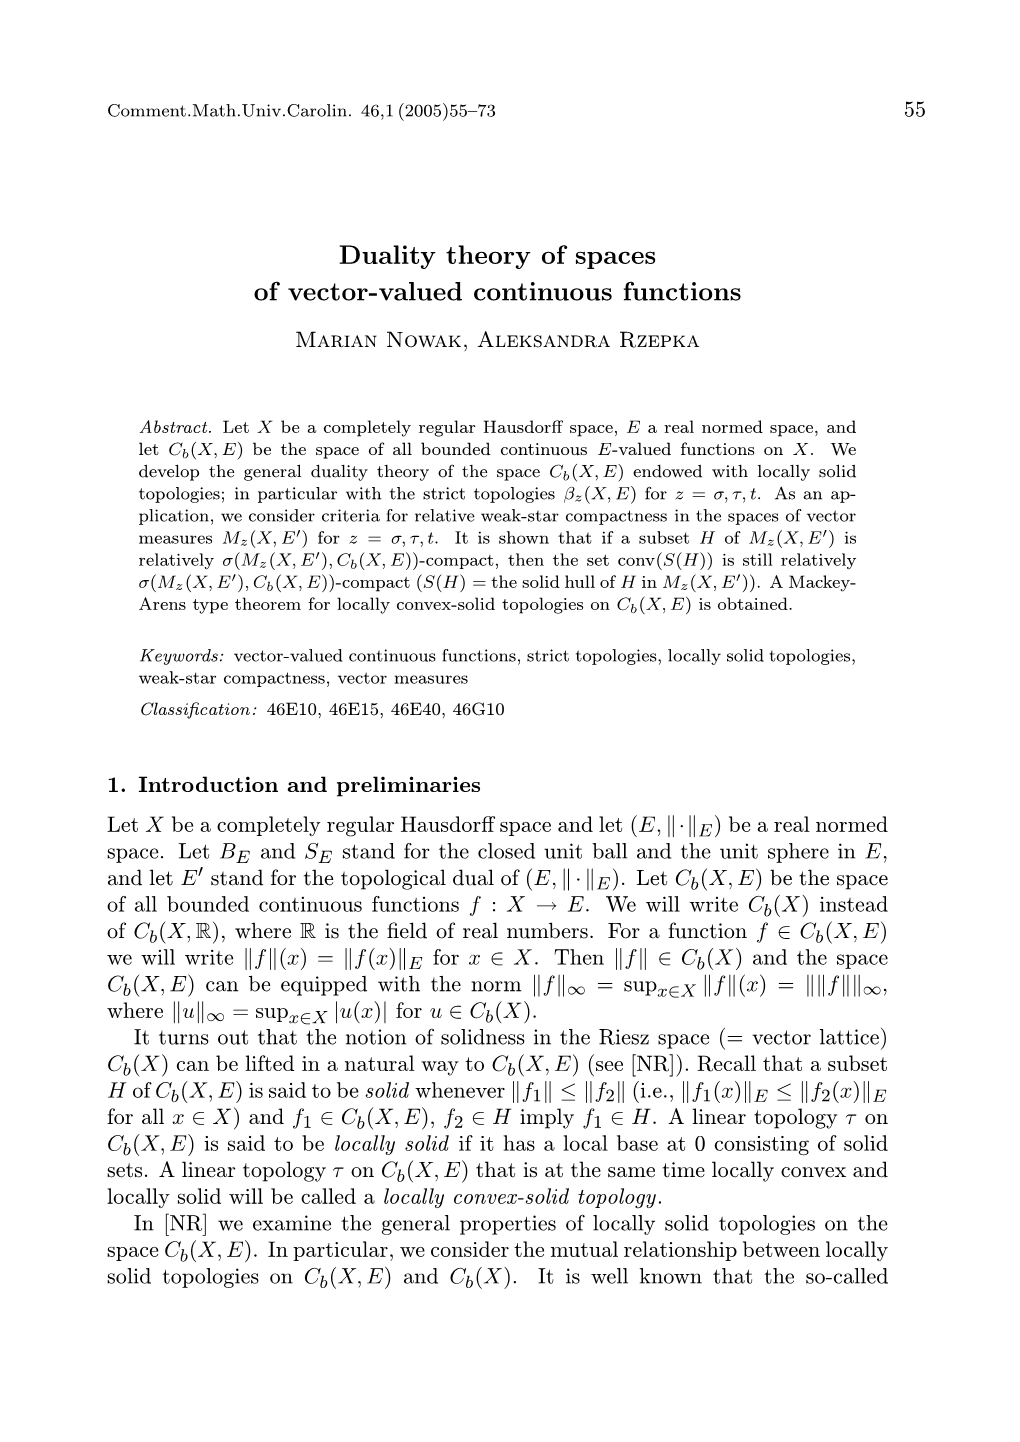 Duality Theory of Spaces of Vector-Valued Continuous Functions